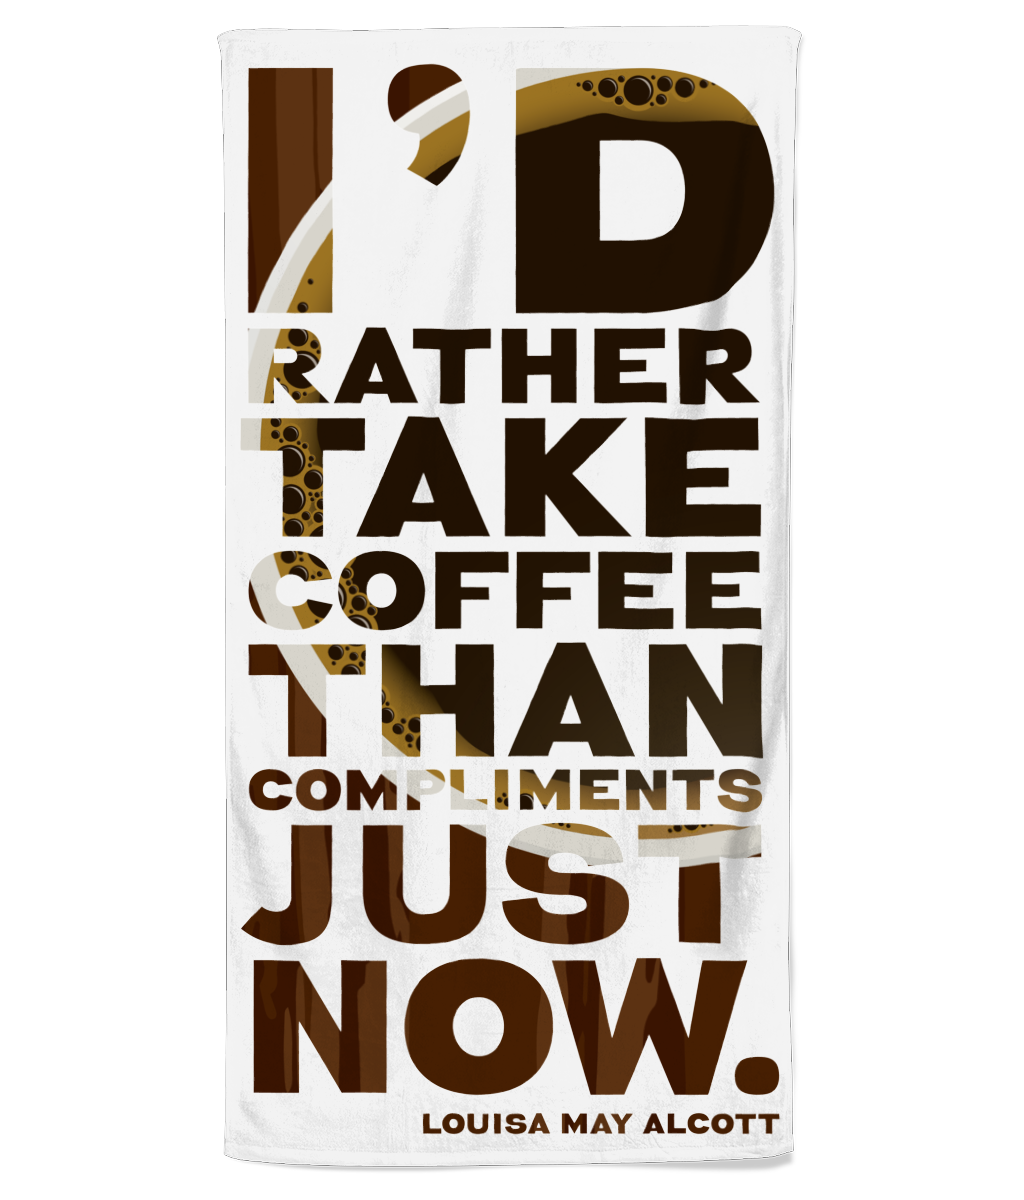 Coffee Lover Beach Towel "I'd rather take coffee than compliments just now." gift for coffee lover